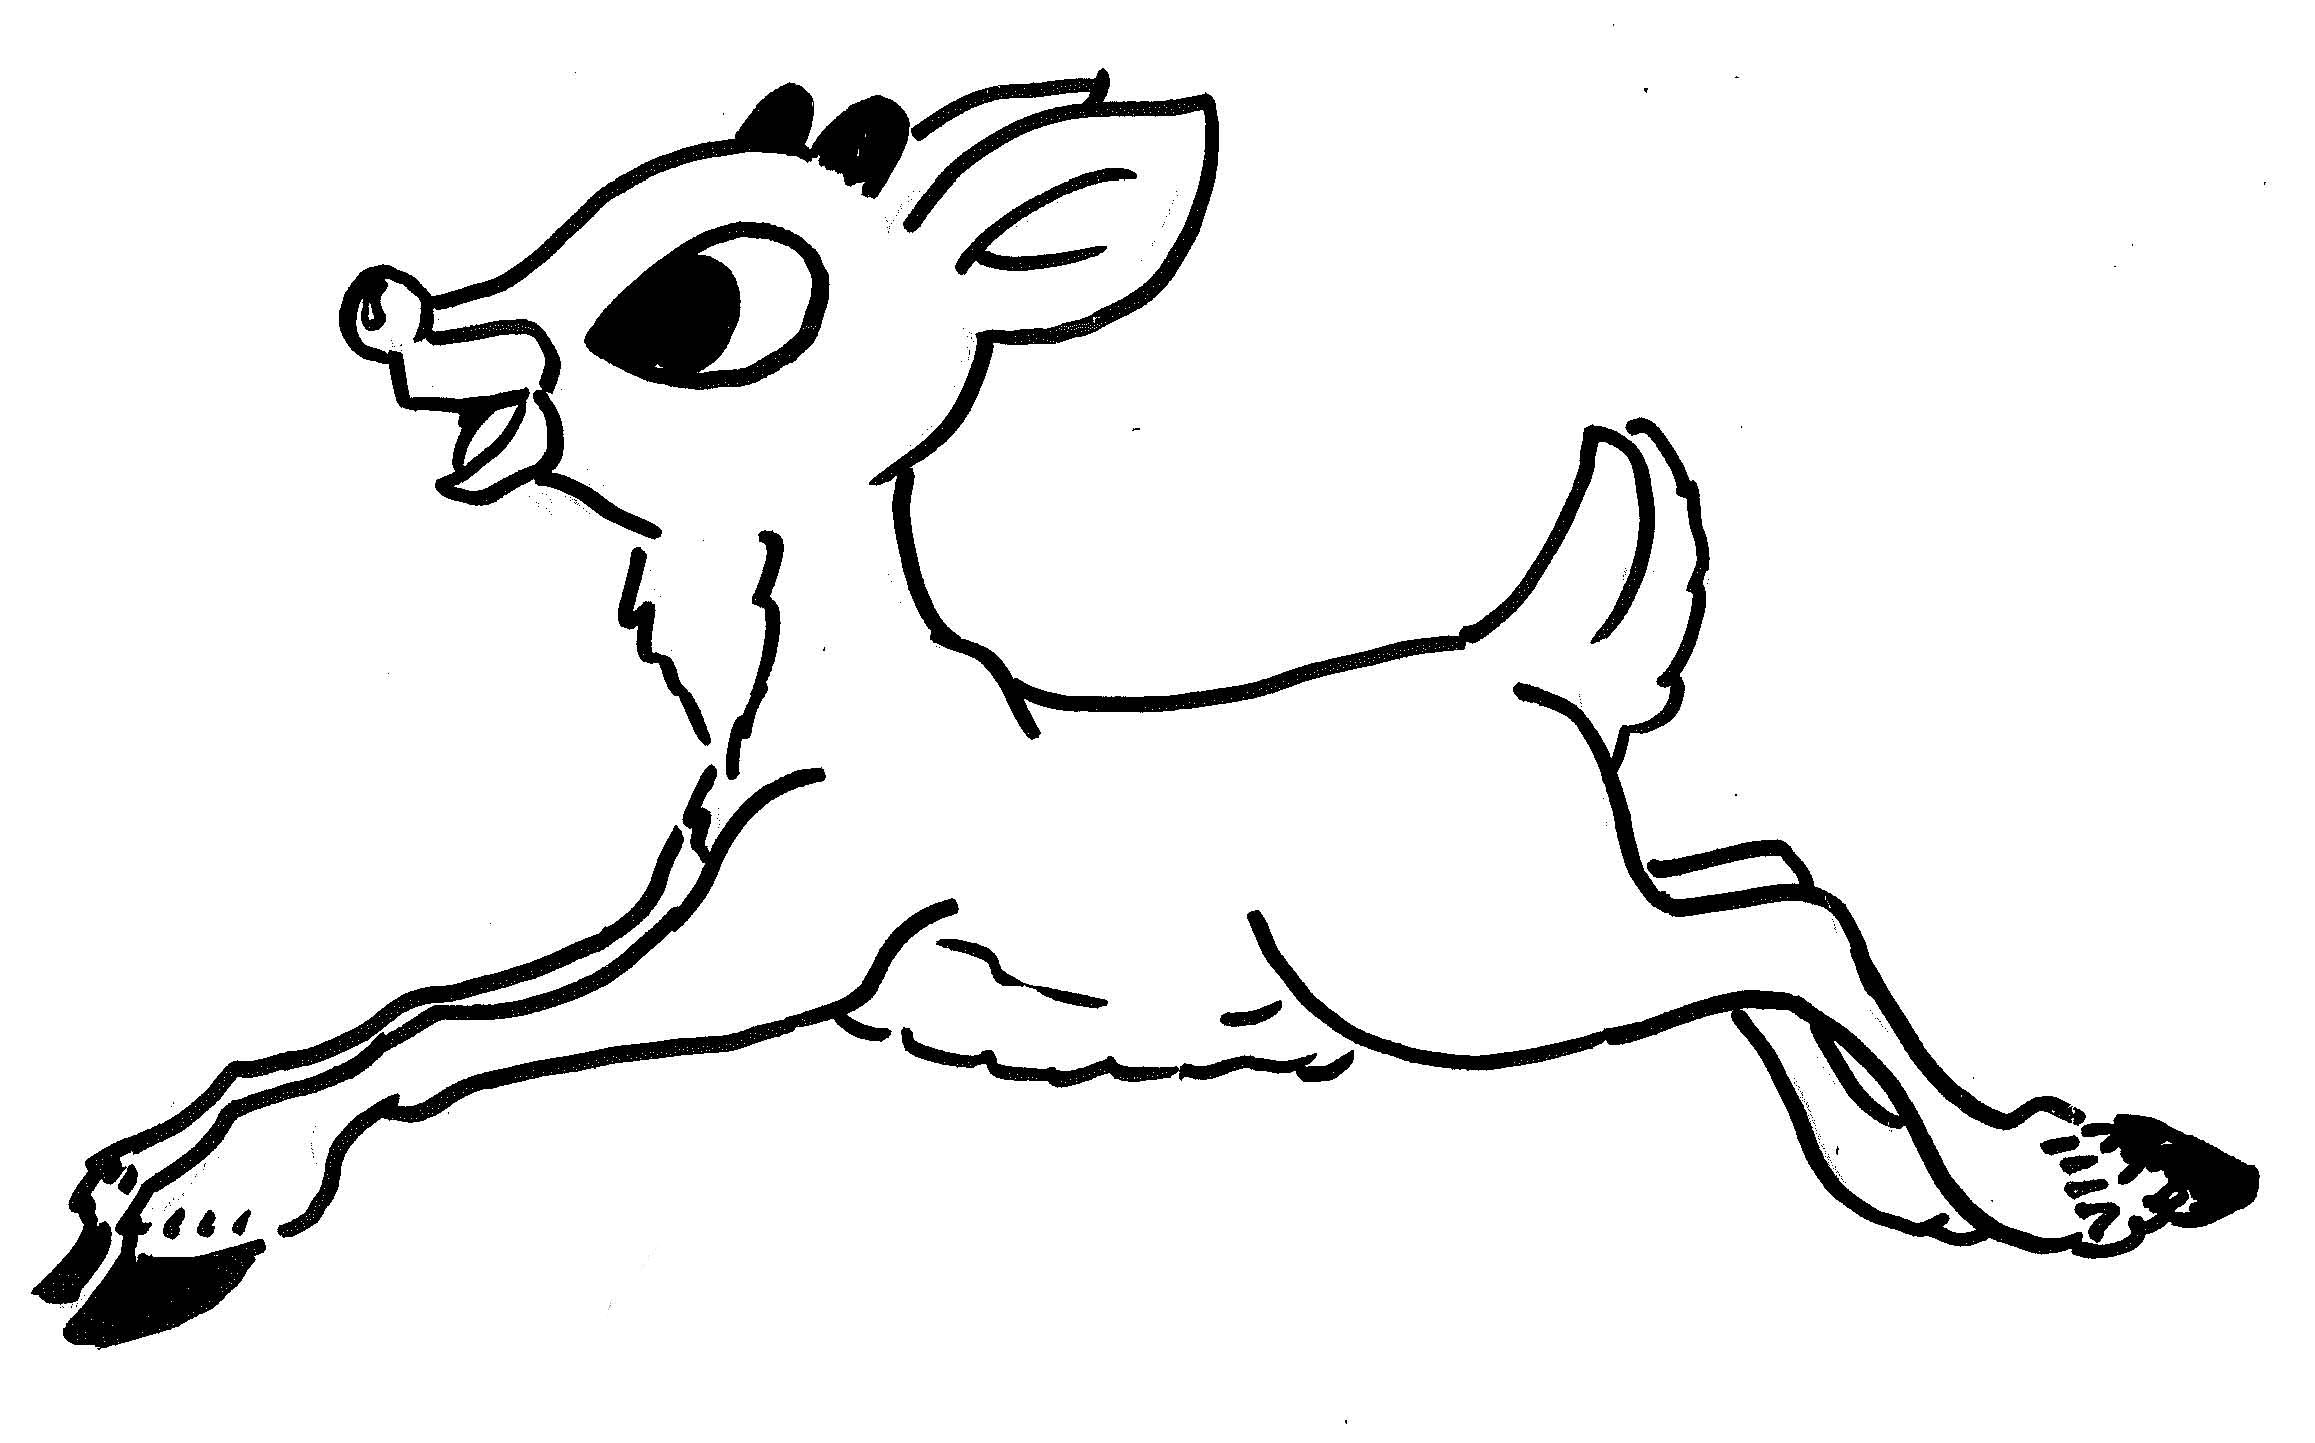 Rudolph reindeer coloring pages download and print for free